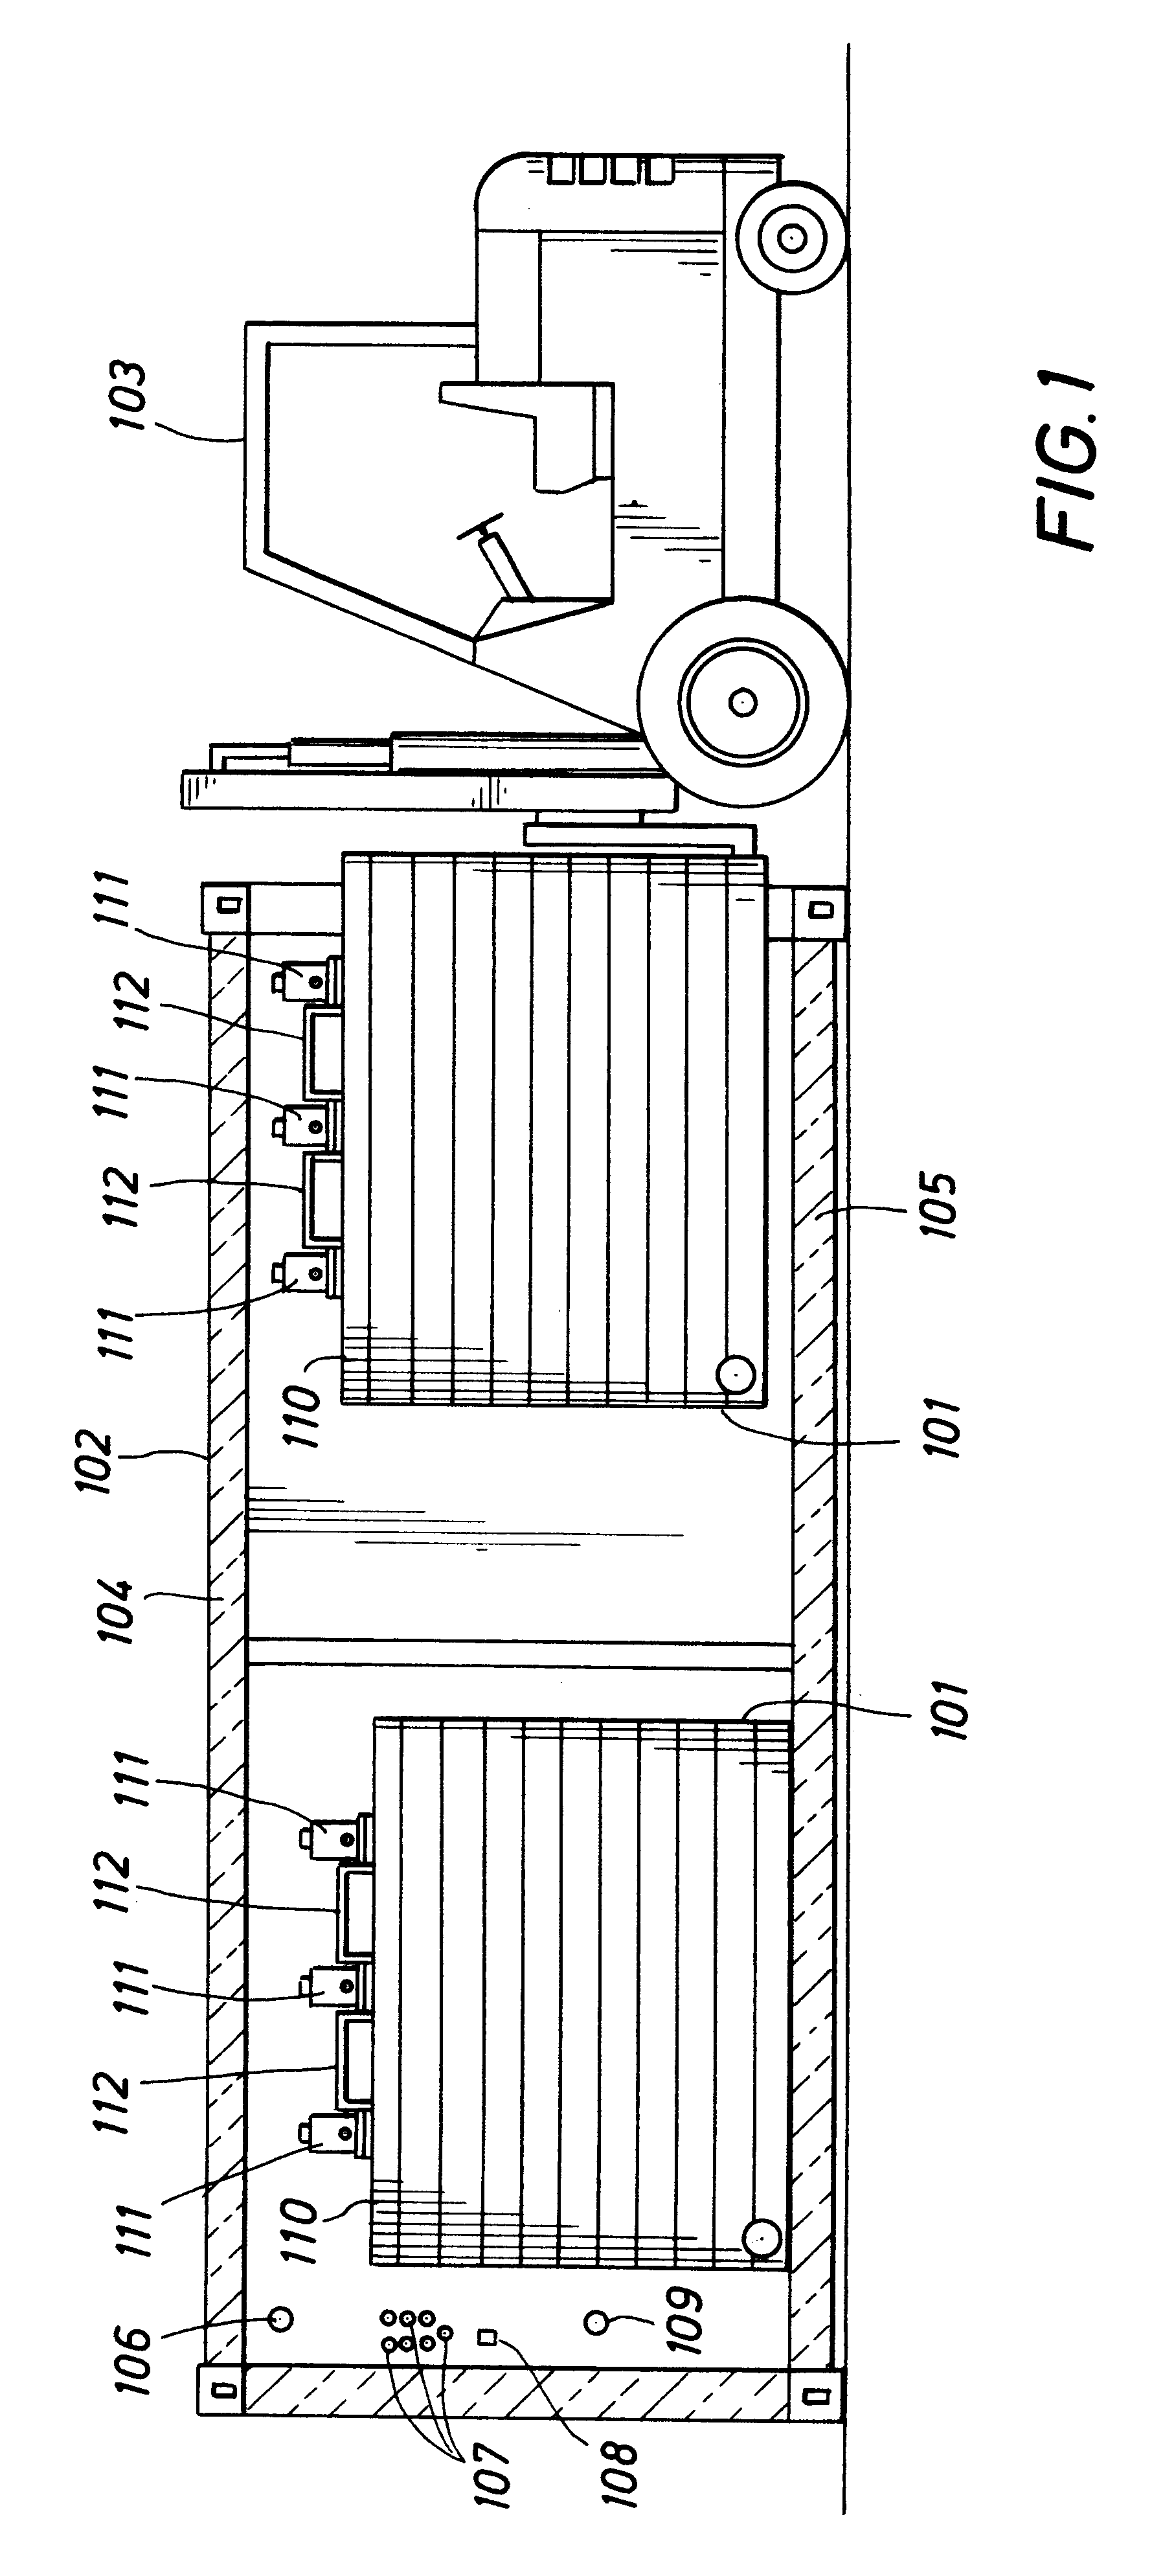 Apparatus for exsitu thermal remediation